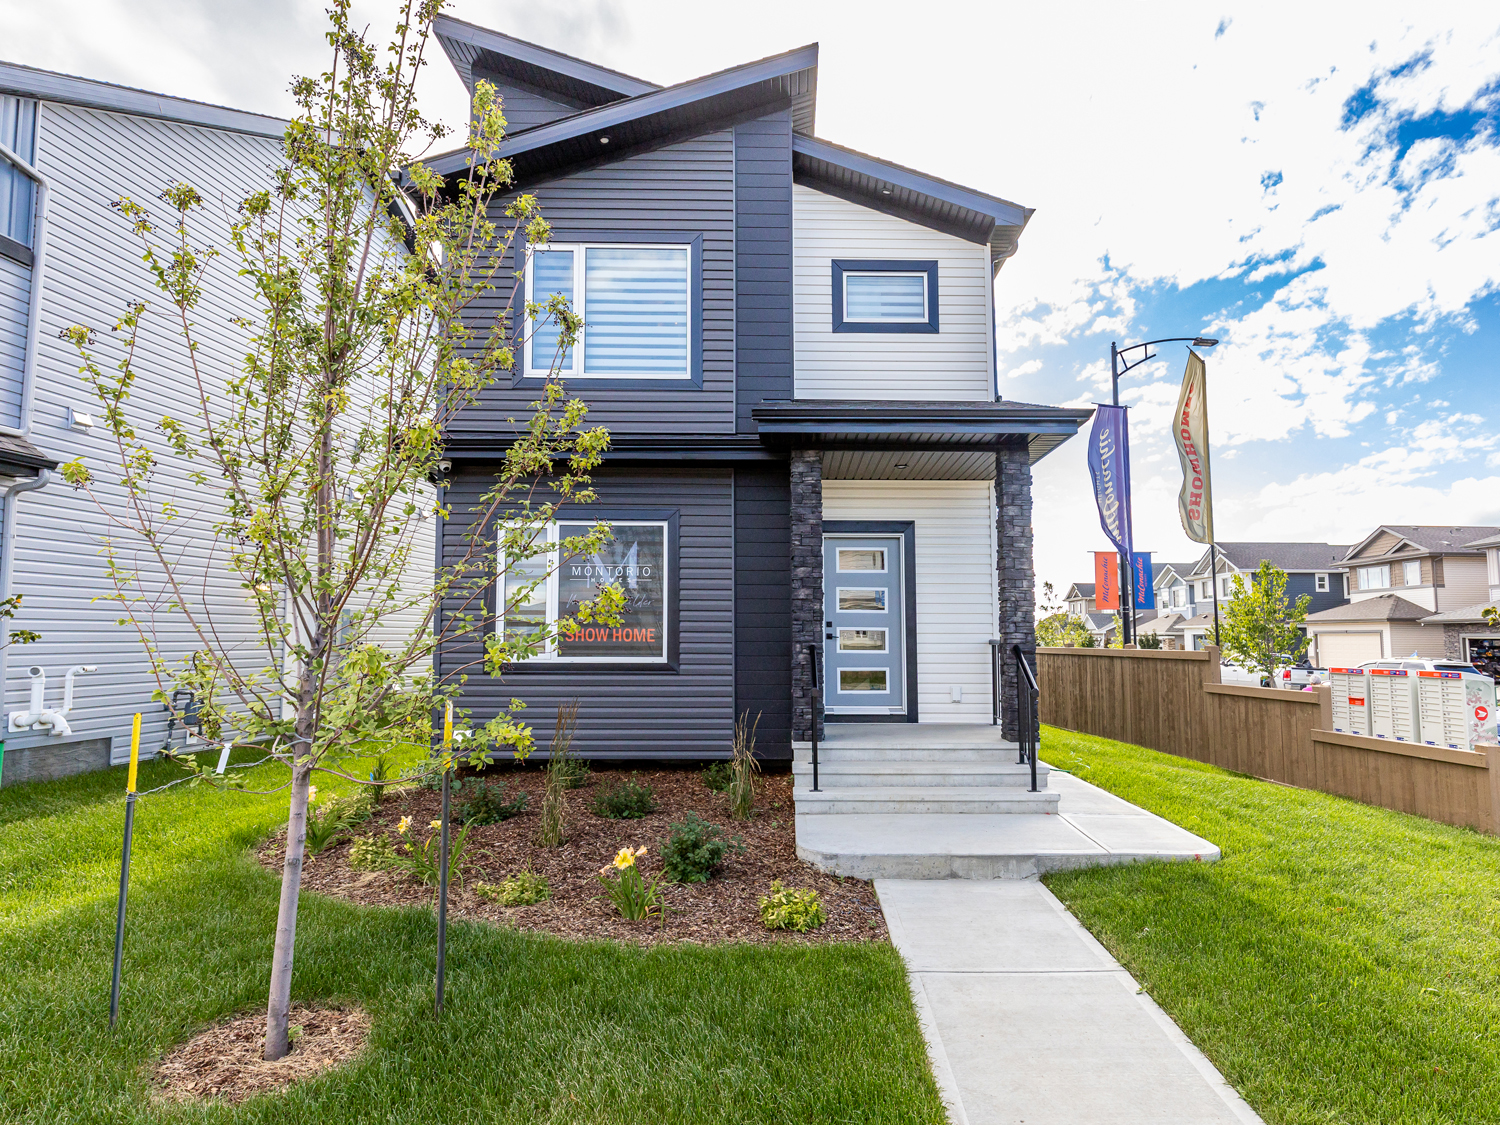 17740-63 Street NW, Edmonton, McConnachie Heights, 4 Bedrooms Bedrooms, ,3 BathroomsBathrooms,Single Family Homes,Show Home,1030